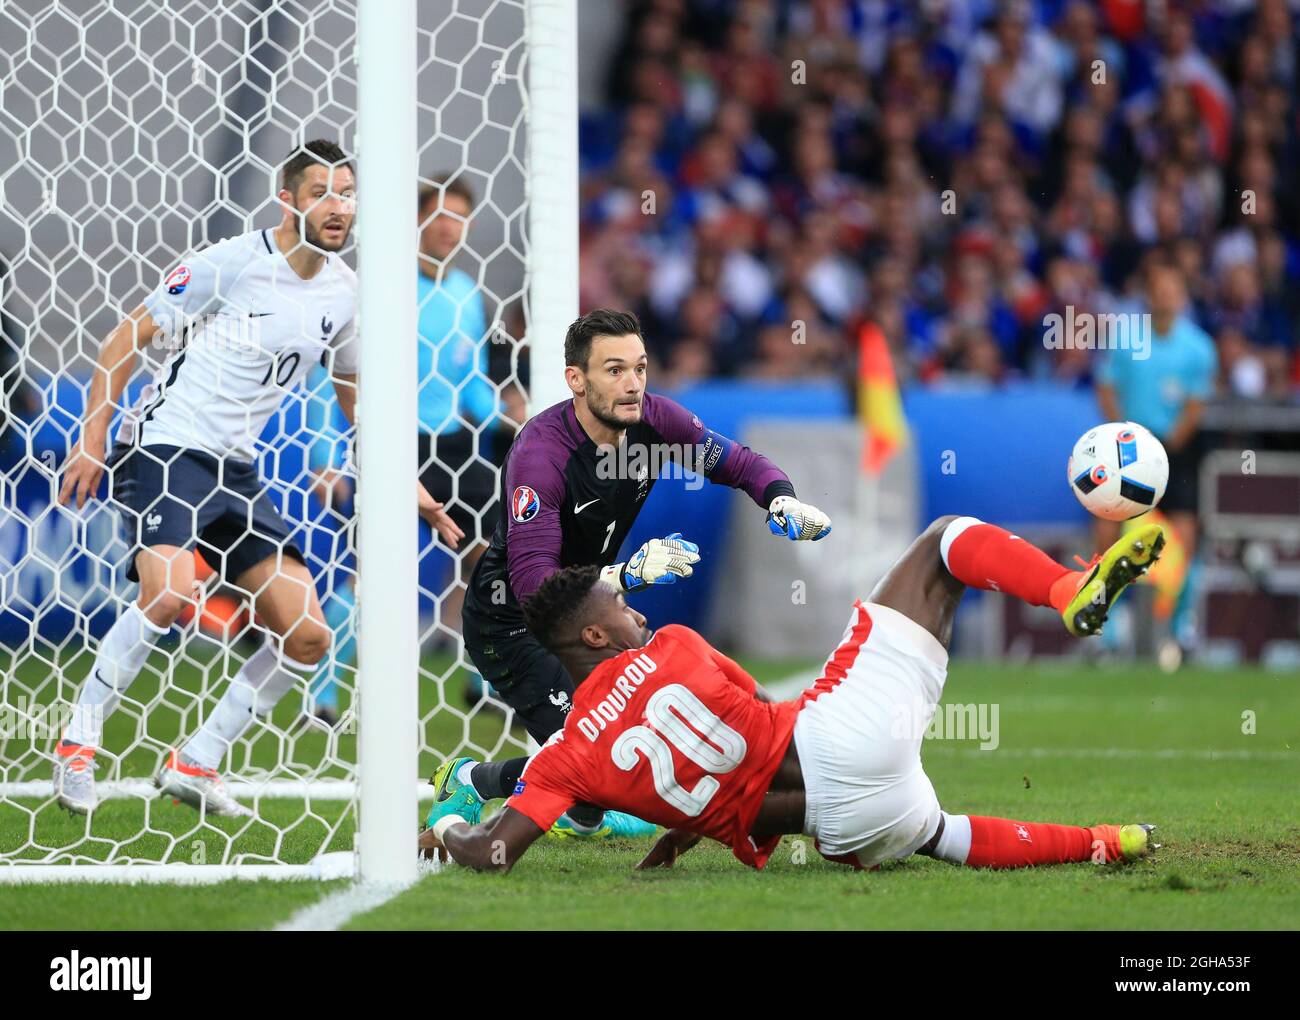 Switzerland's Johan Djourou sees his shot saved by France's Hugo Lloris during the UEFA European Championship 2016 match at the Stade Pierre-Mauroy, Lille. Picture date June 19th, 2016 Pic David Klein/Sportimage via PA Images Stock Photo